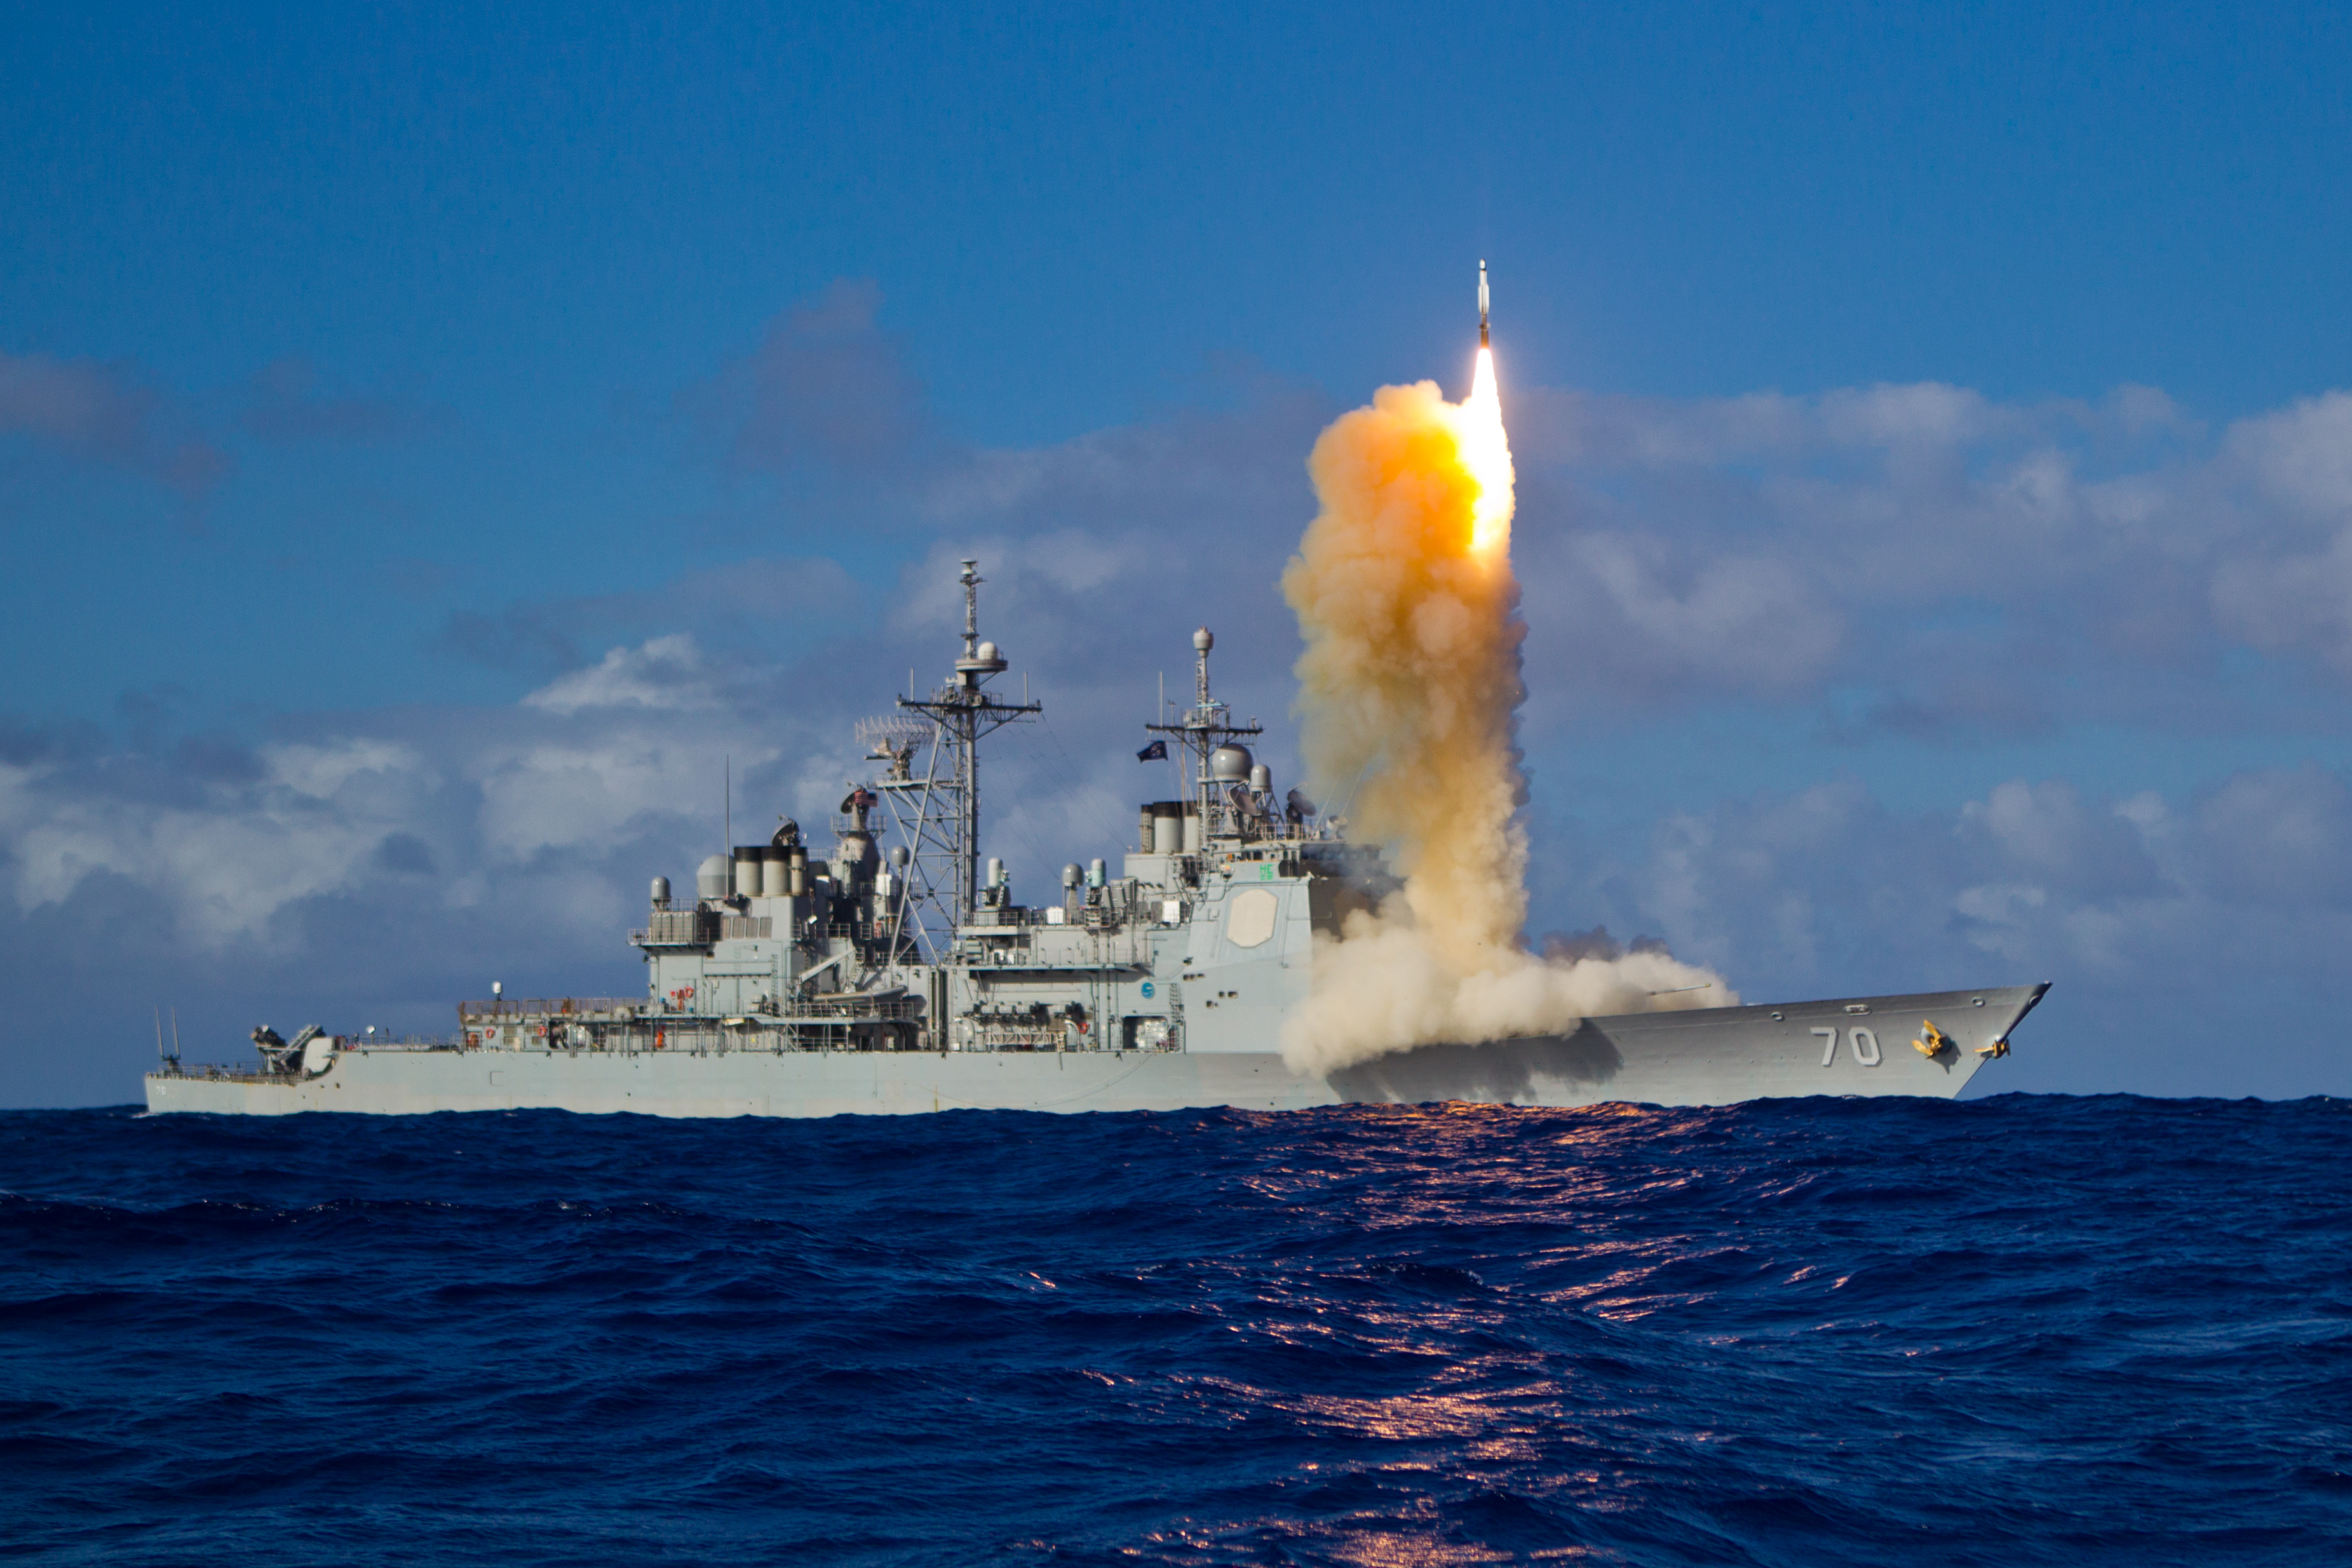 Missile Defense Test, May 16, 2013